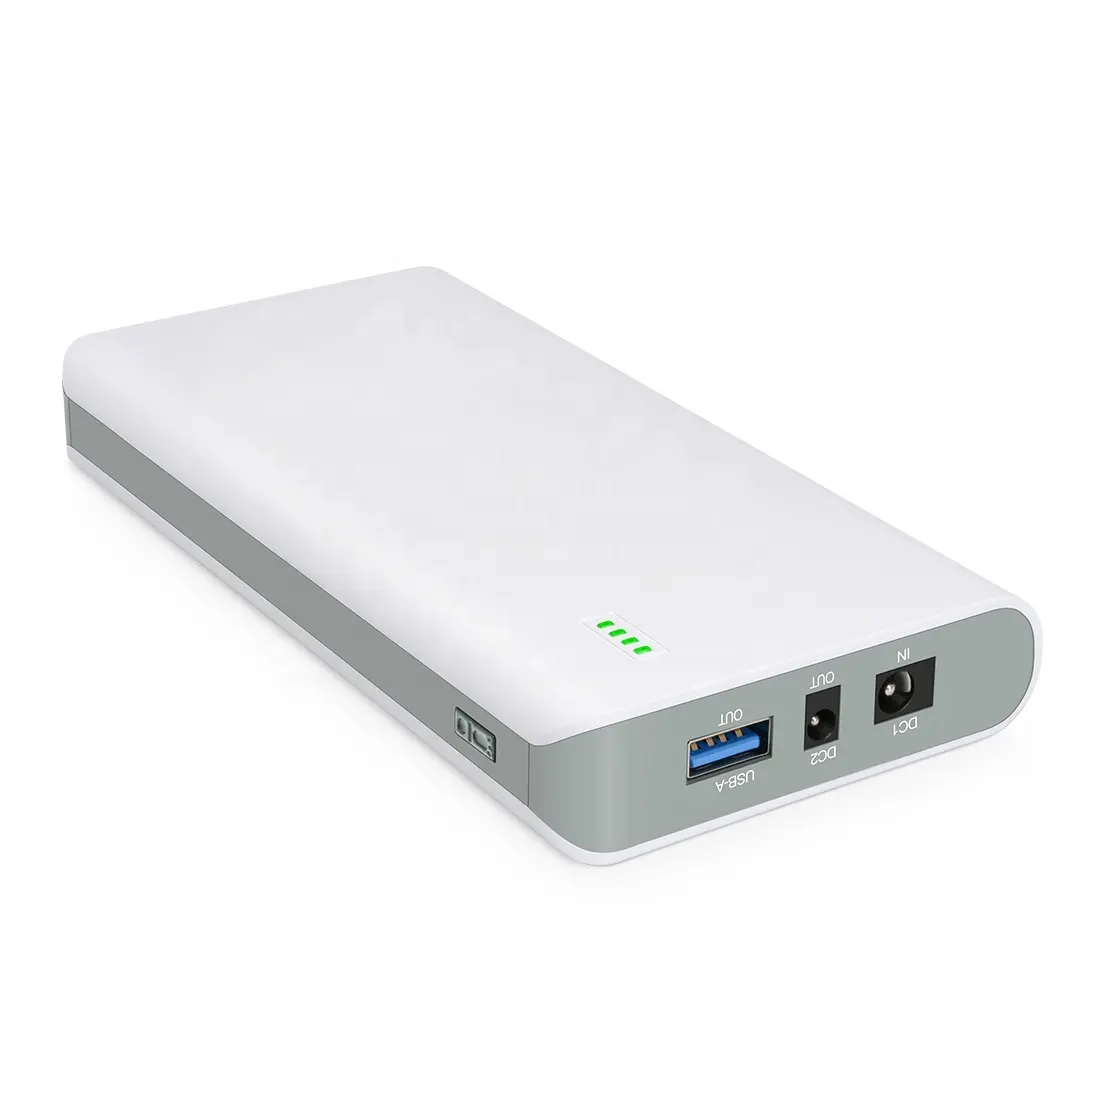 NB7101 17500mAh Notebook Powerbank Lithium Ion Battery Pack Rechargeable Portable Charger Power Bank Laptop